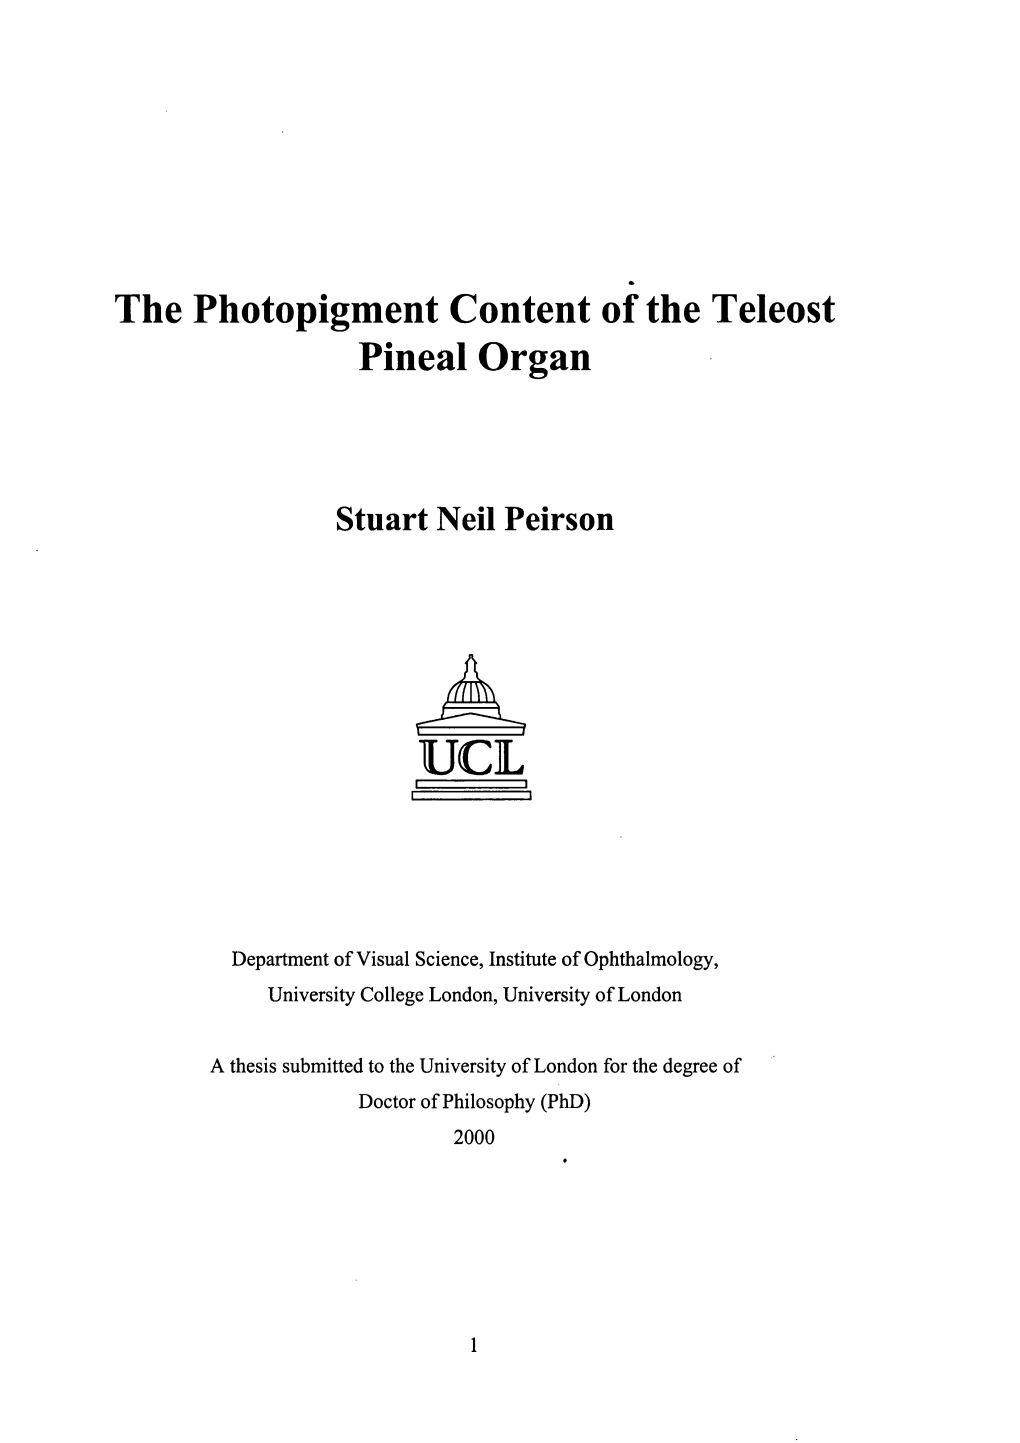 The Photopigment Content of the Teleost Pineal Organ